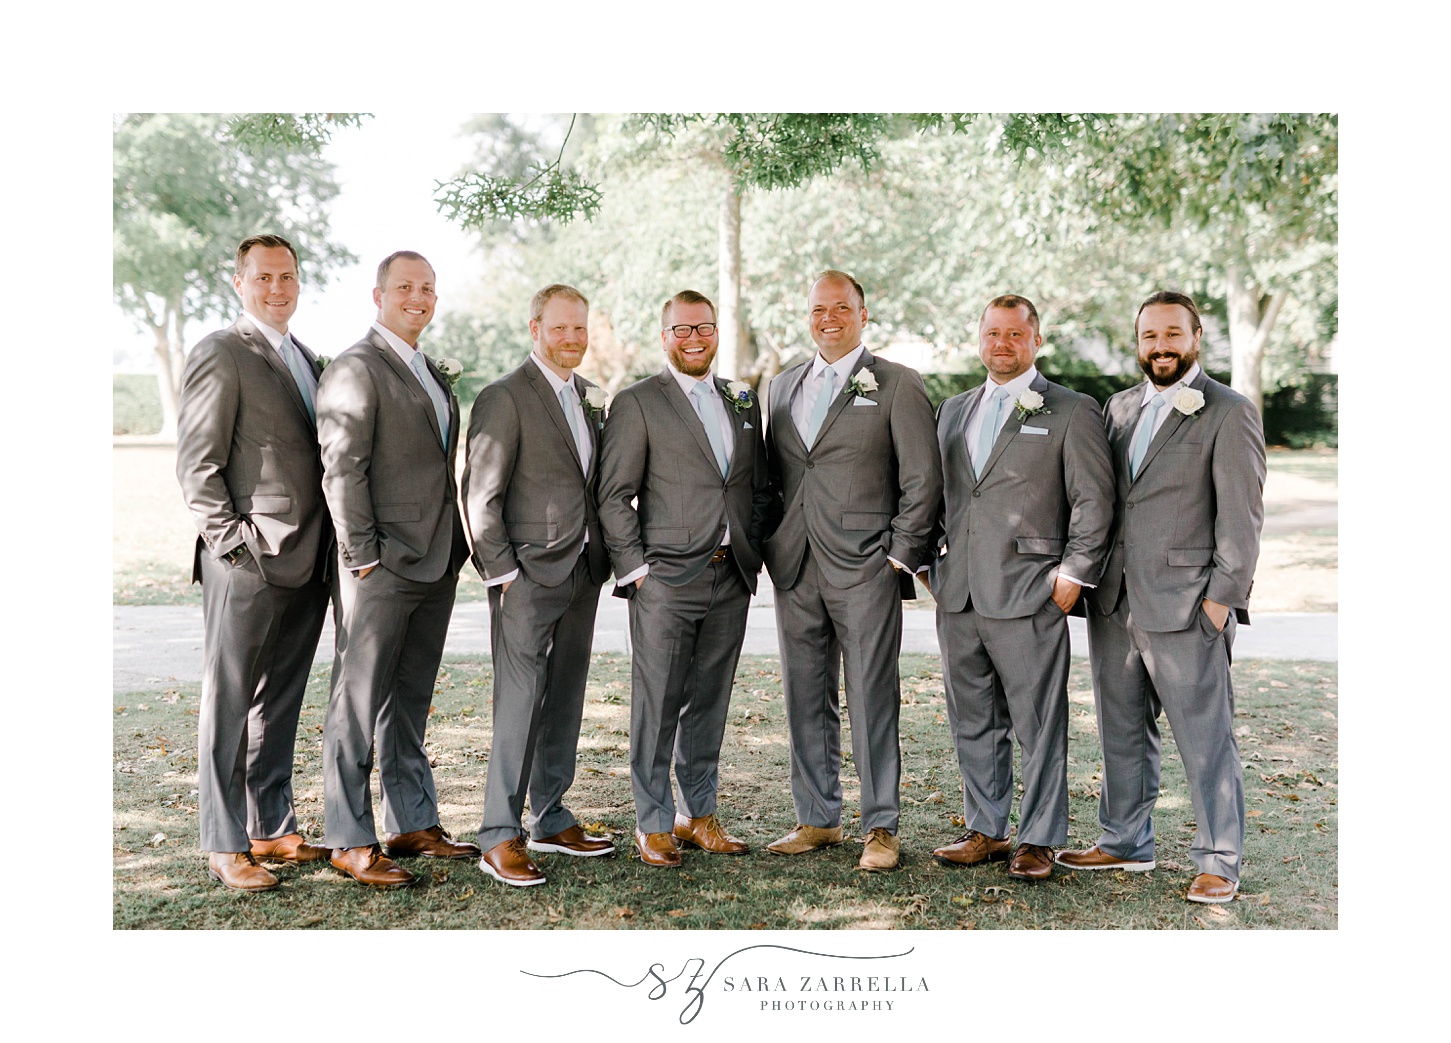 groom and groomsmen in grey suits stand together in park